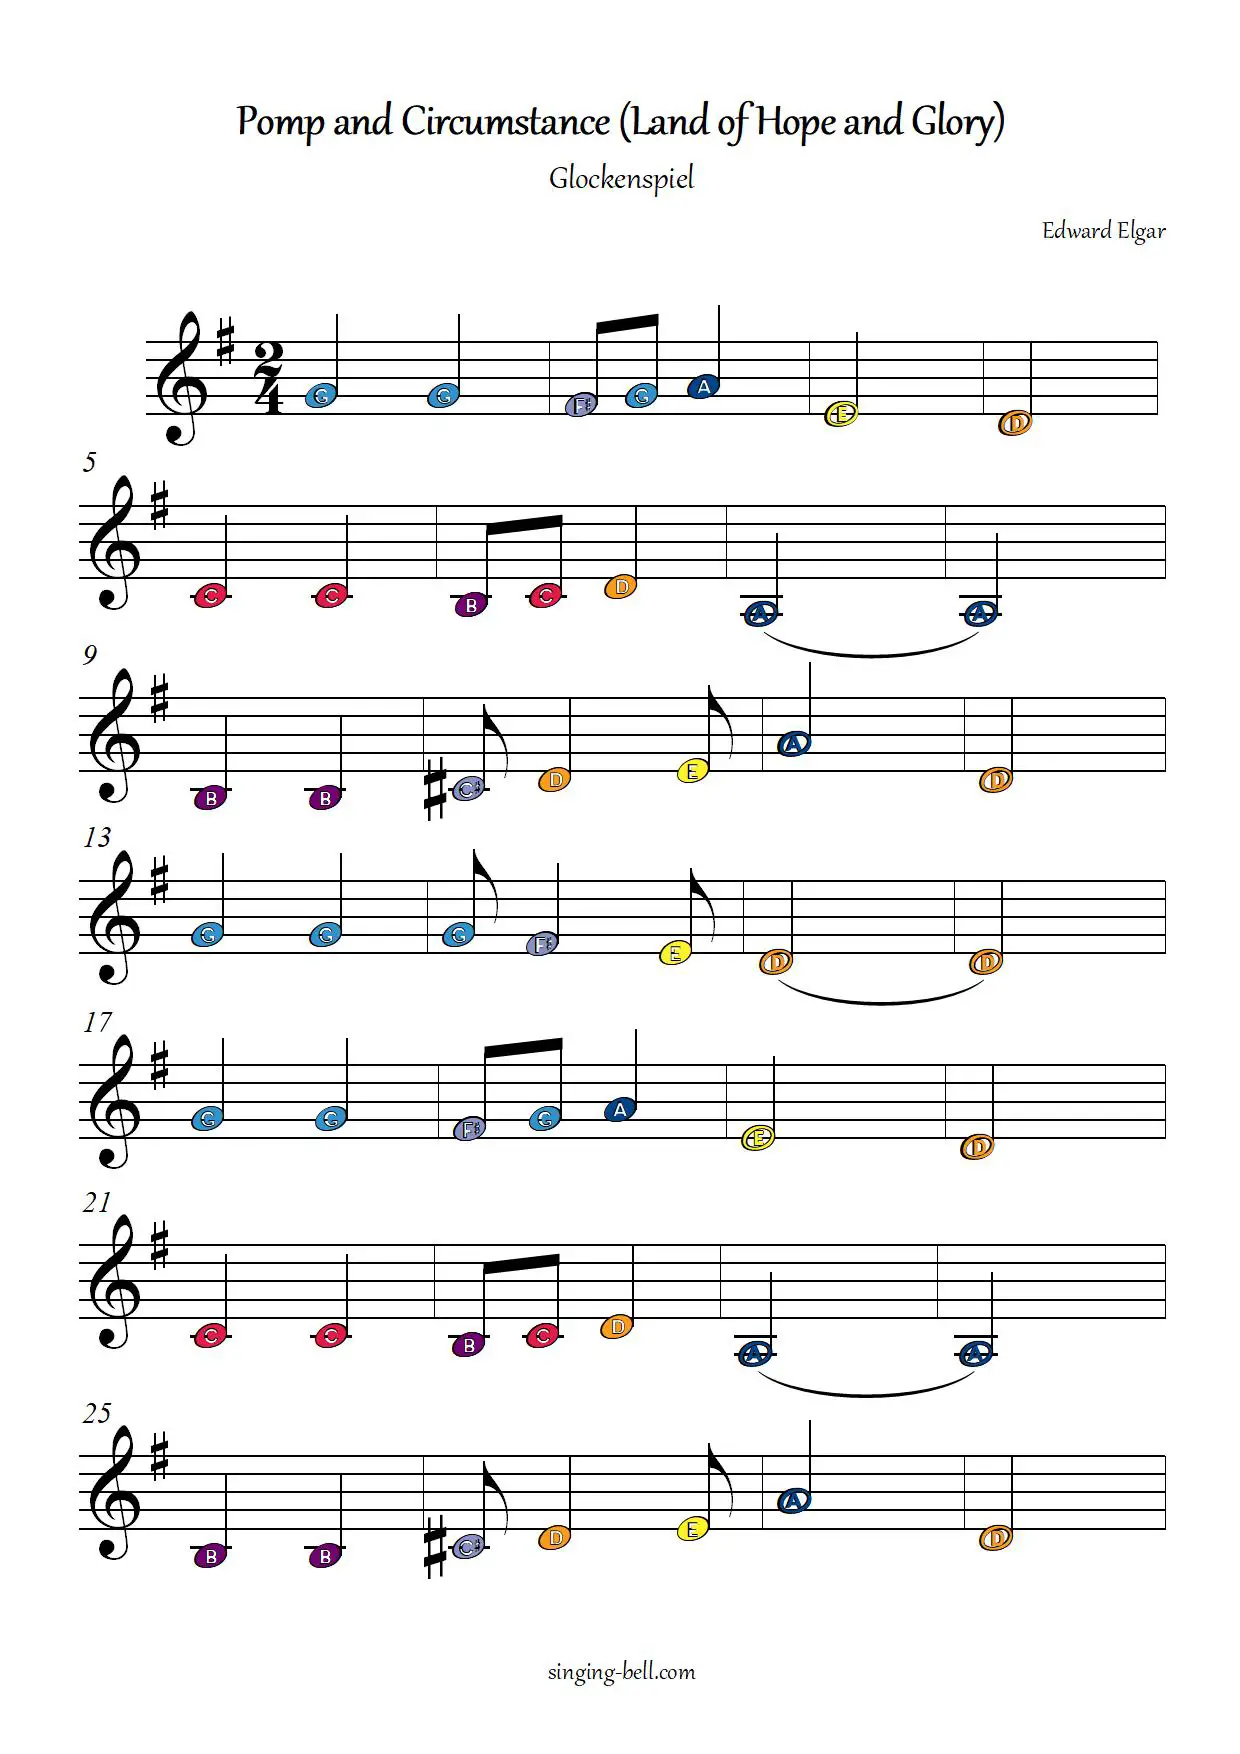 Pomp_and_Circumstance free xylophone glockenspiel sheet music color notes chart pdf page-1